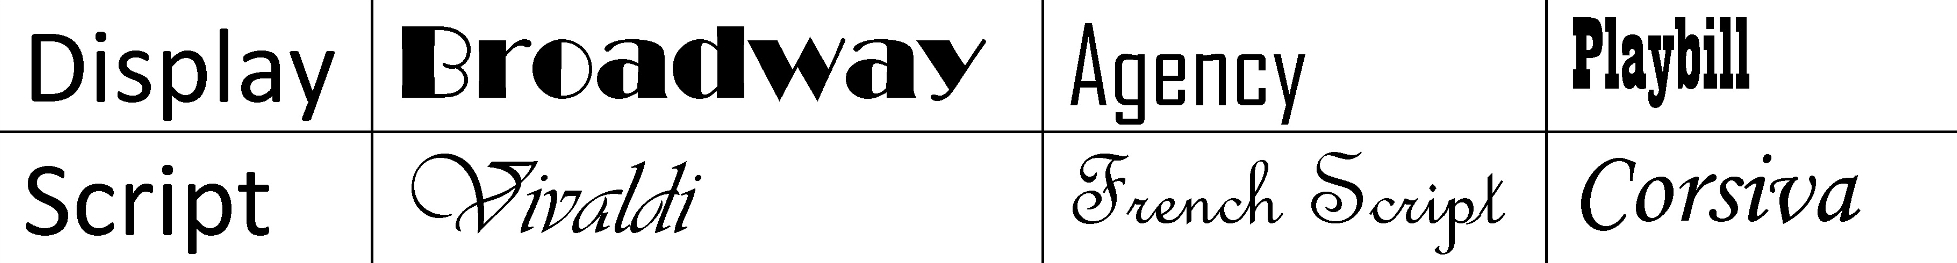 Display typefaces compared with script typefaces